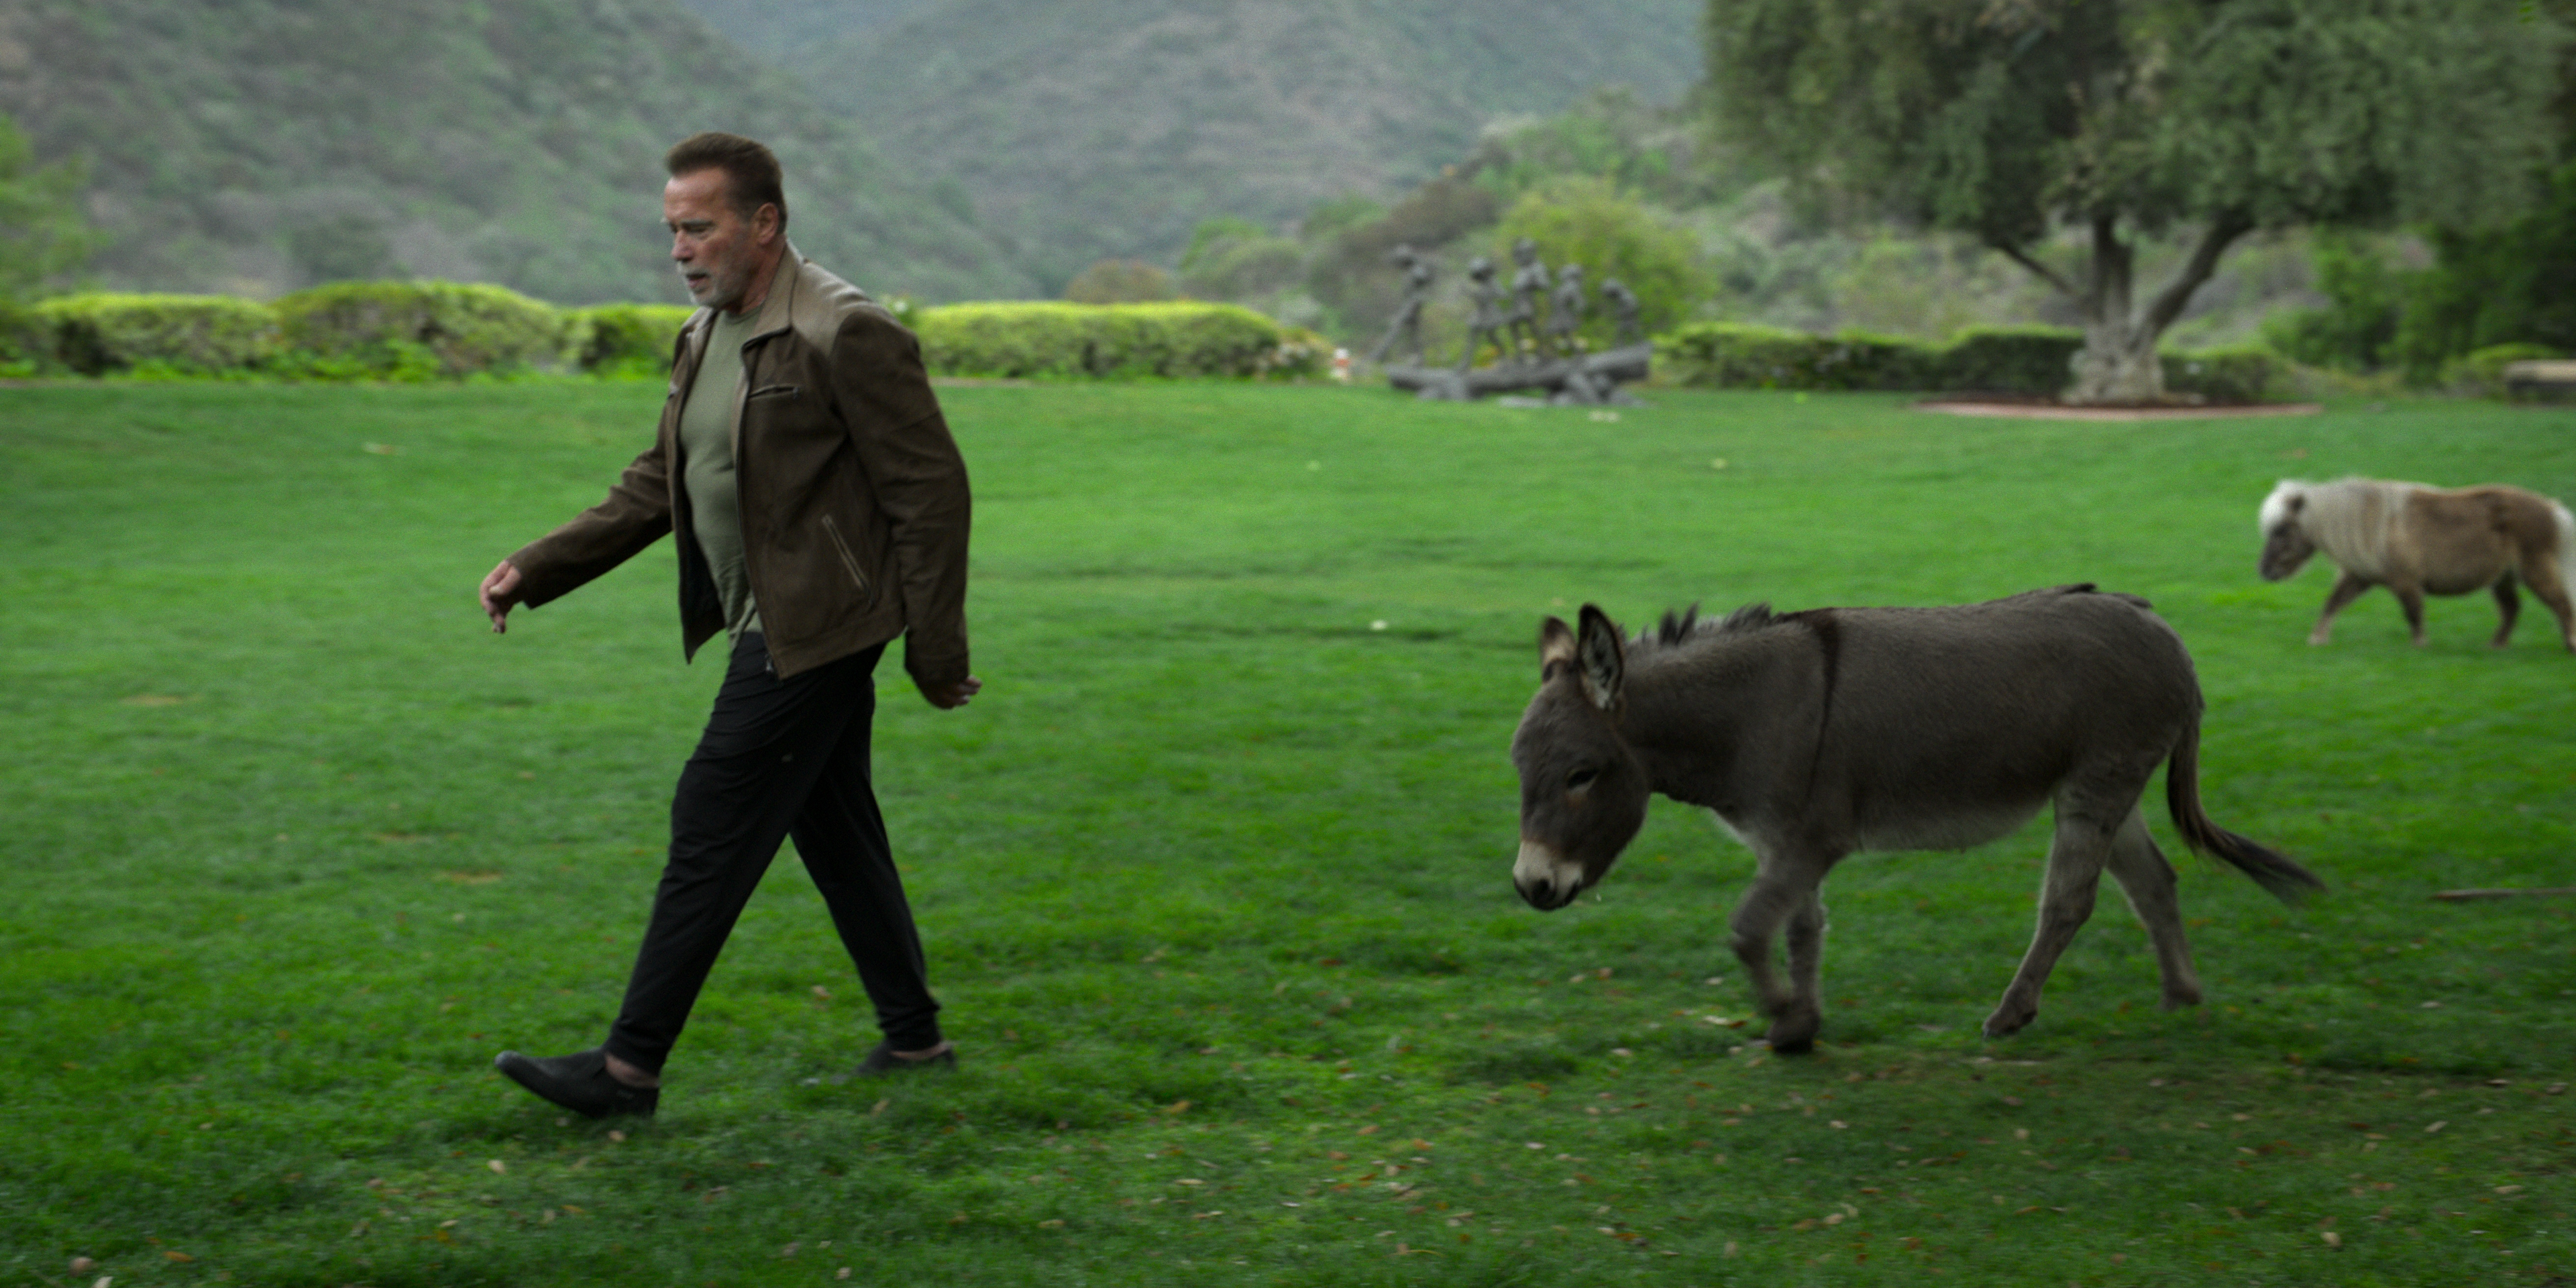 Arnold Schwarzenegger tends to his miniature horse named Whiskey and donkey named Lulu in the backyard of his Pacific Palisades house in Los Angeles.Image: Netflix / Supplied